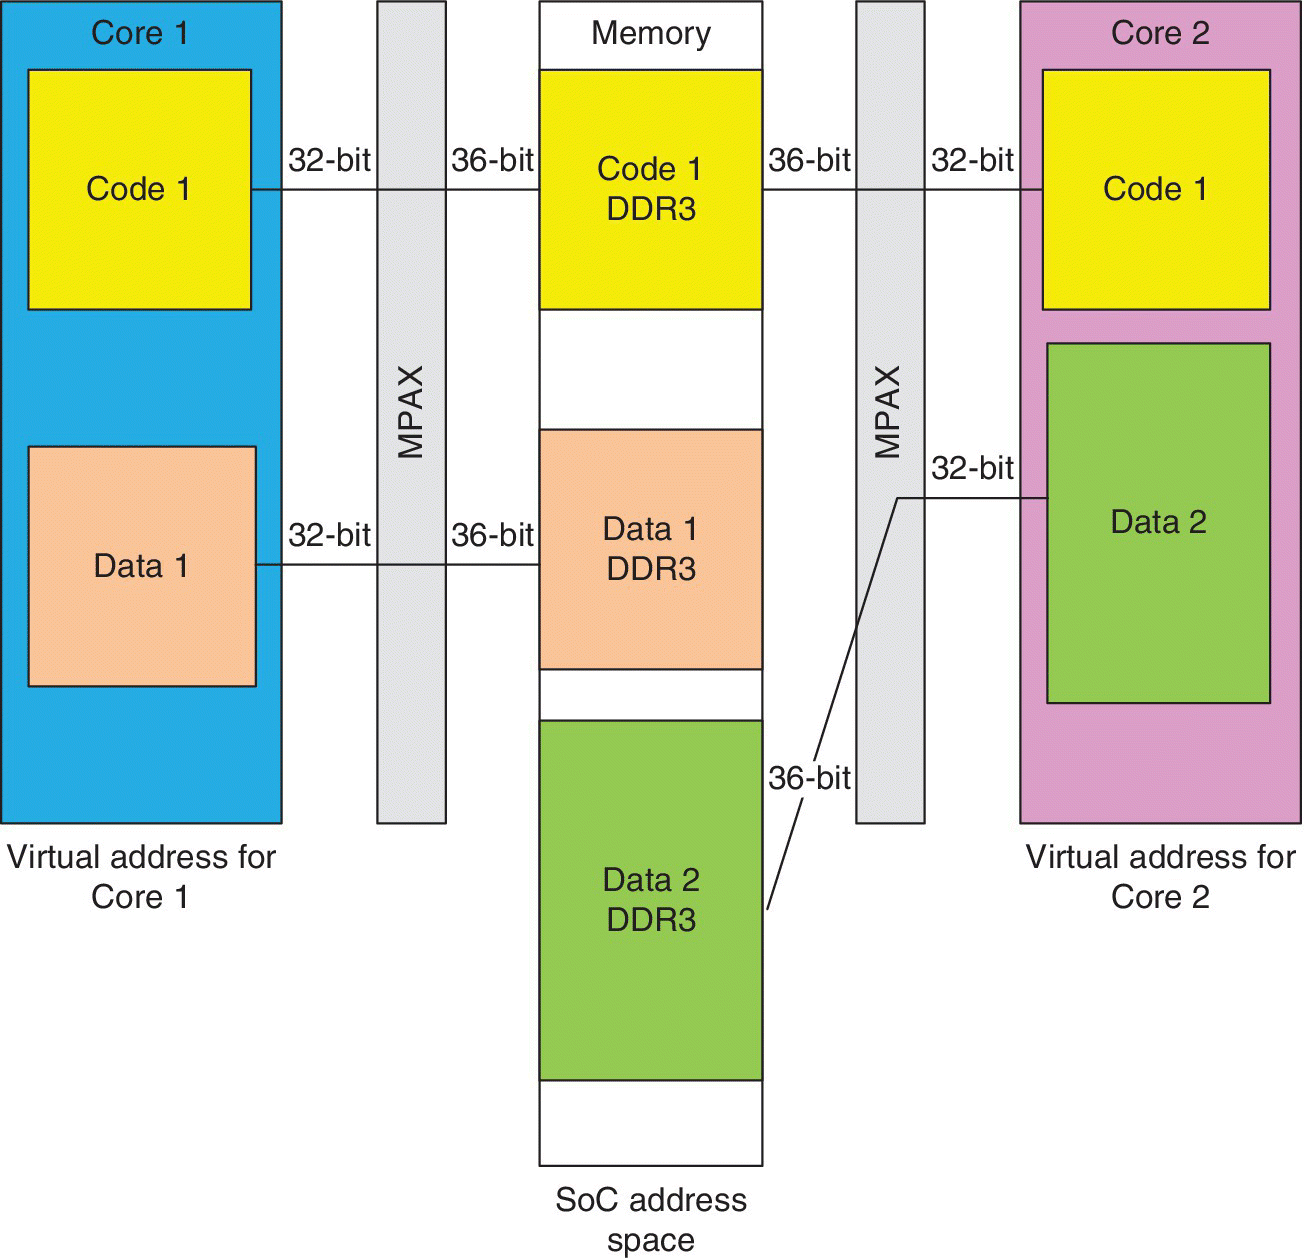 Diagram illustrating the use of MPAX with three phases illustrating the virtual address for core 1 (left), SoC address space (middle), and virtual address for core 2 (right), with its code, data, and memory.